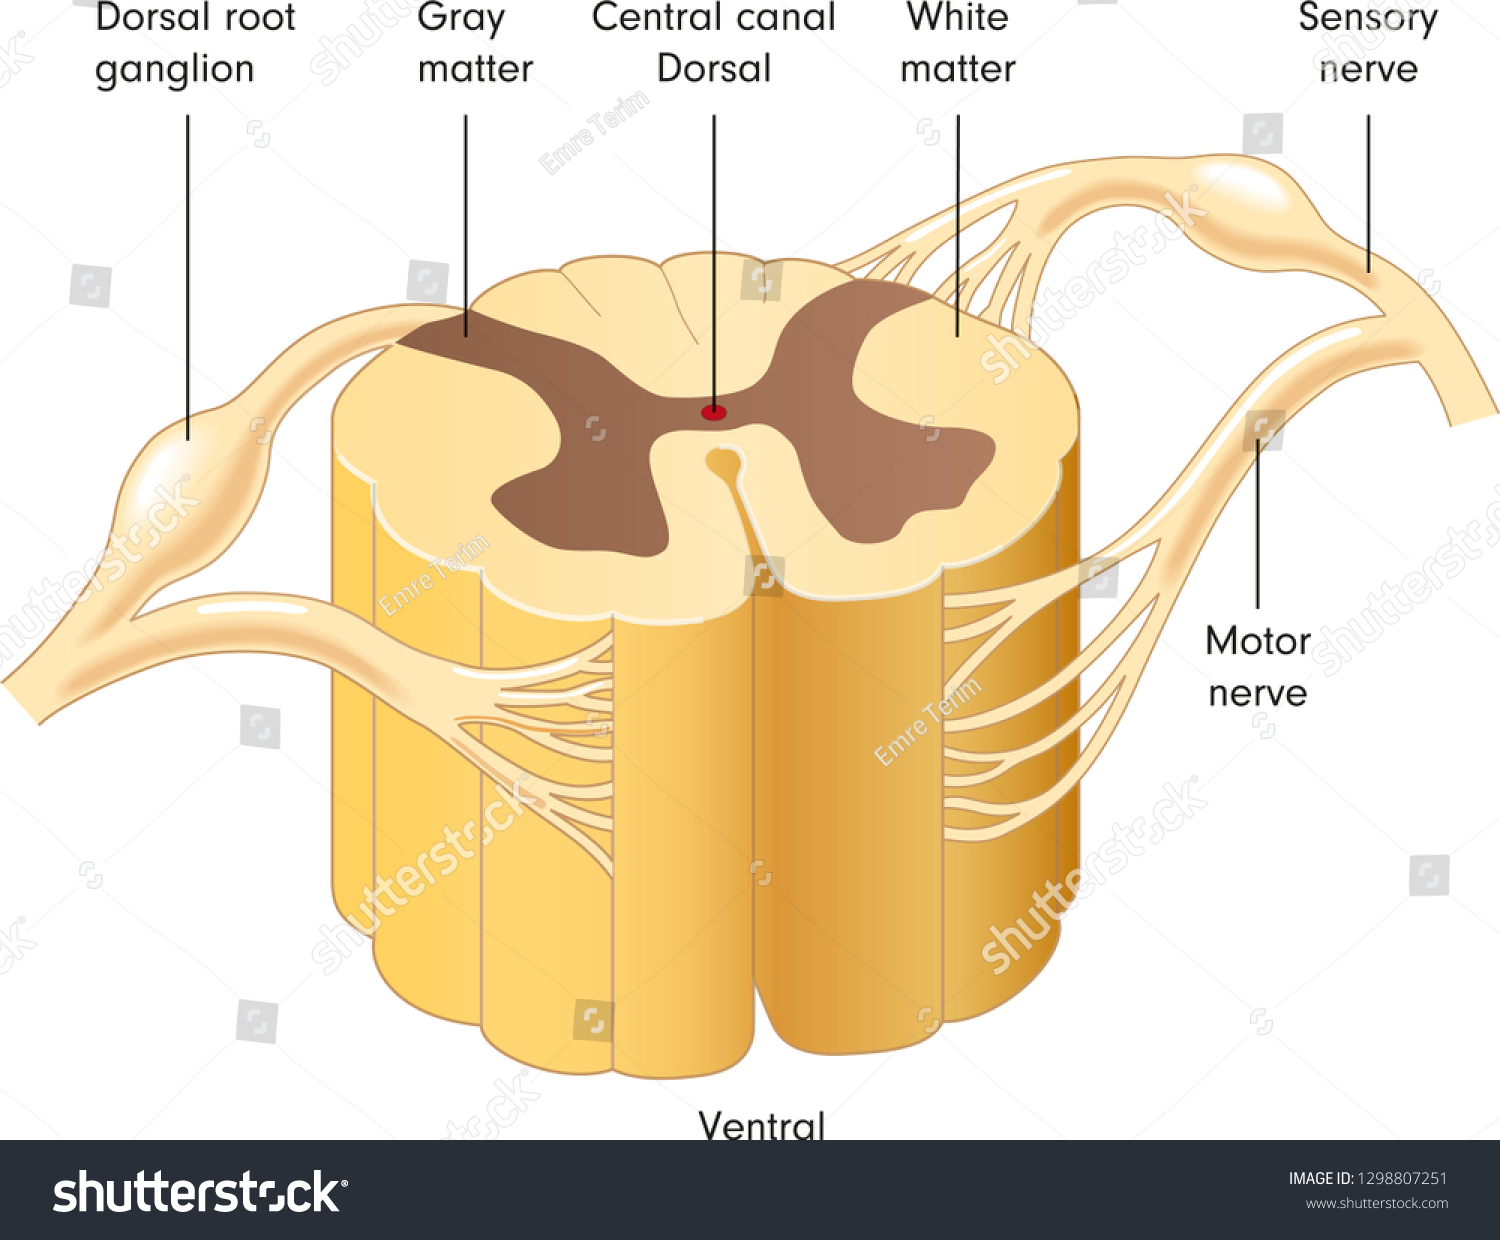 2,089 Spinal cord sections Images, Stock Photos & Vectors | Shutterstock